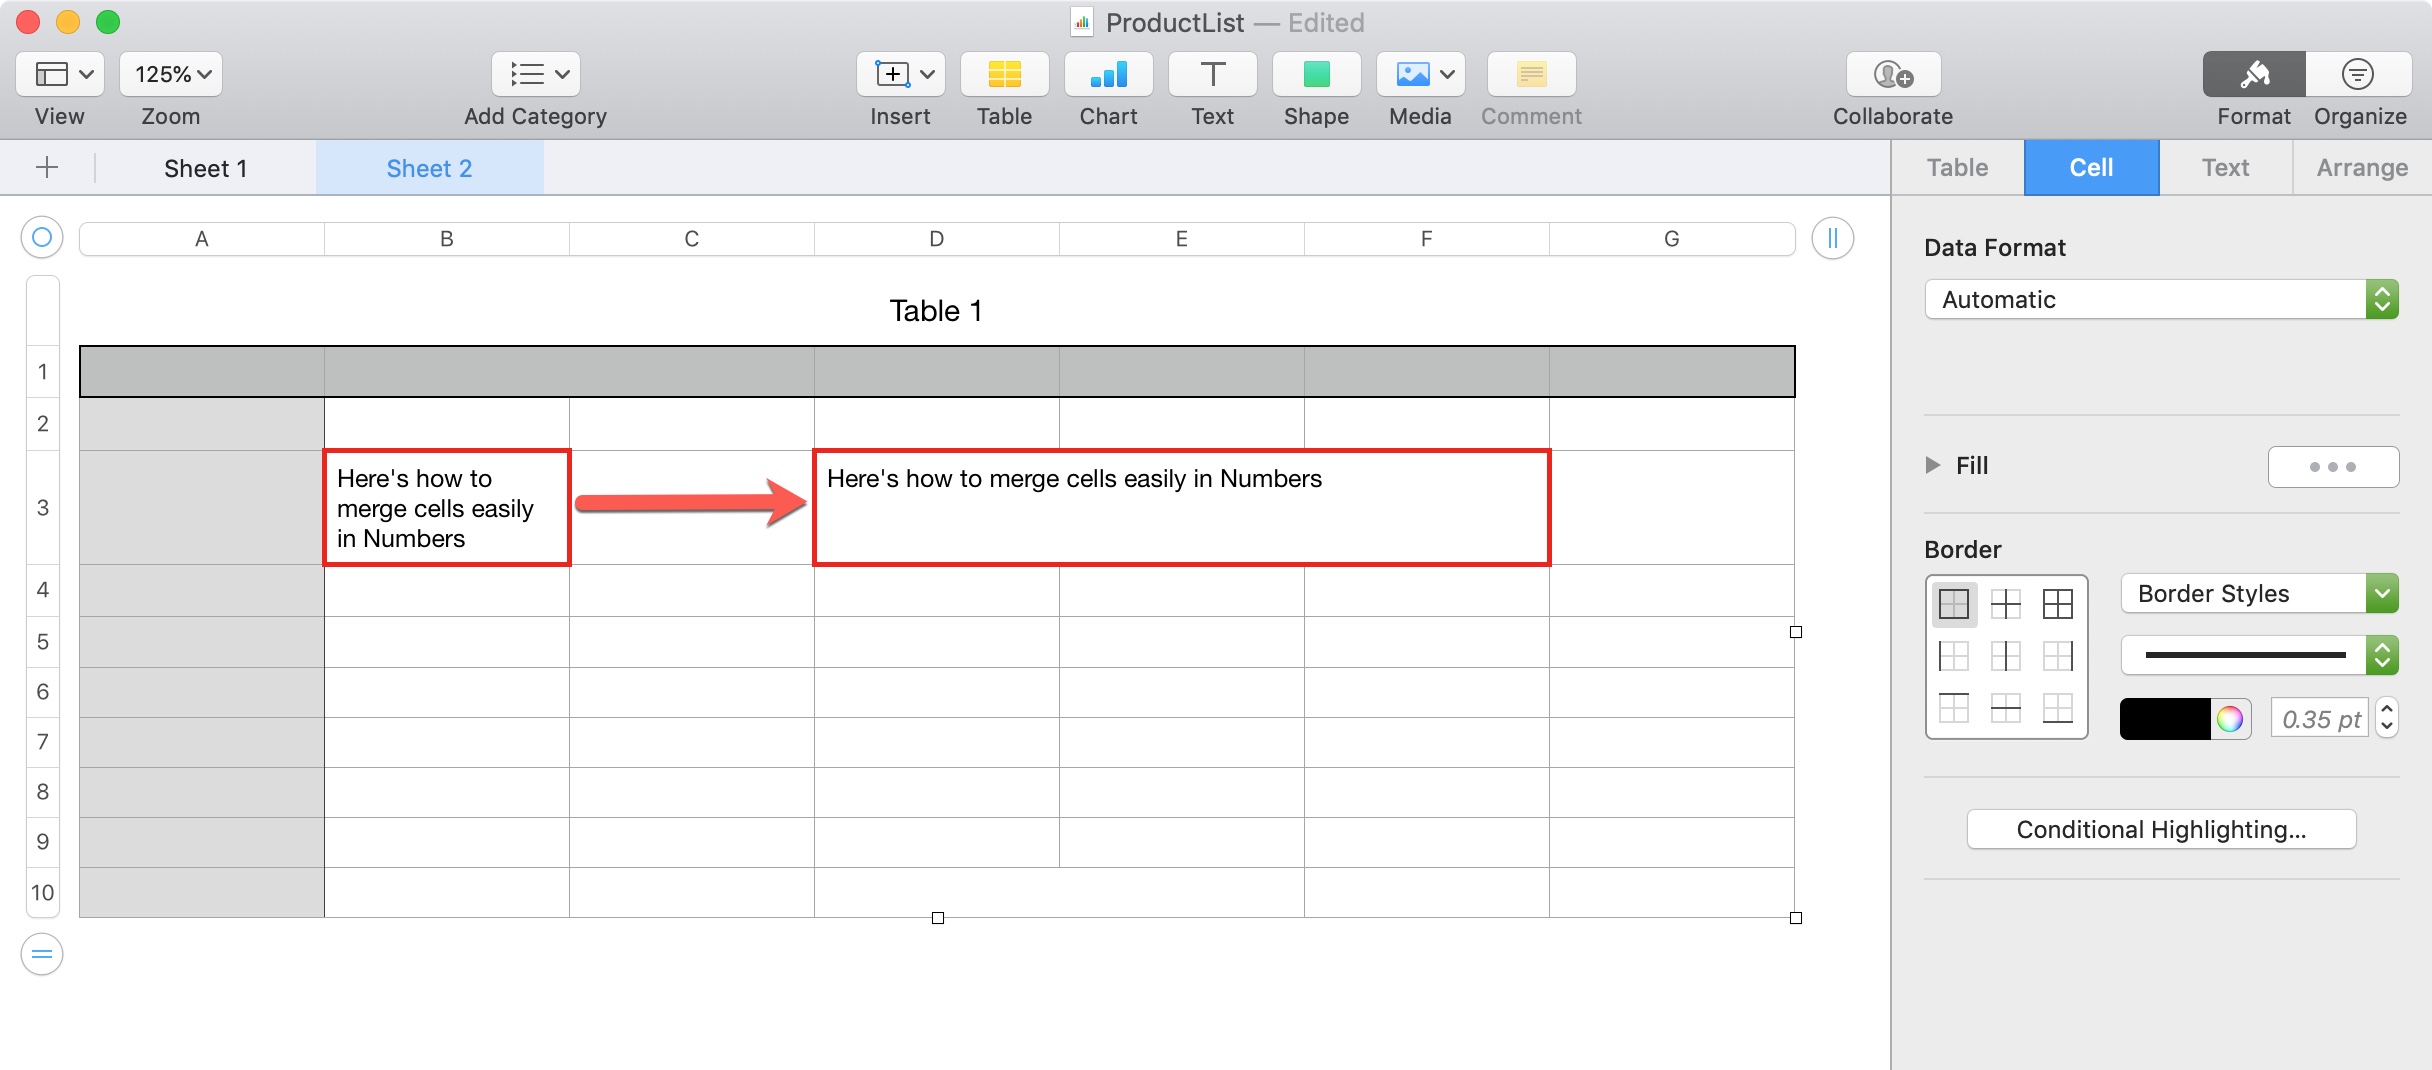 where is merge and center in excel for mac